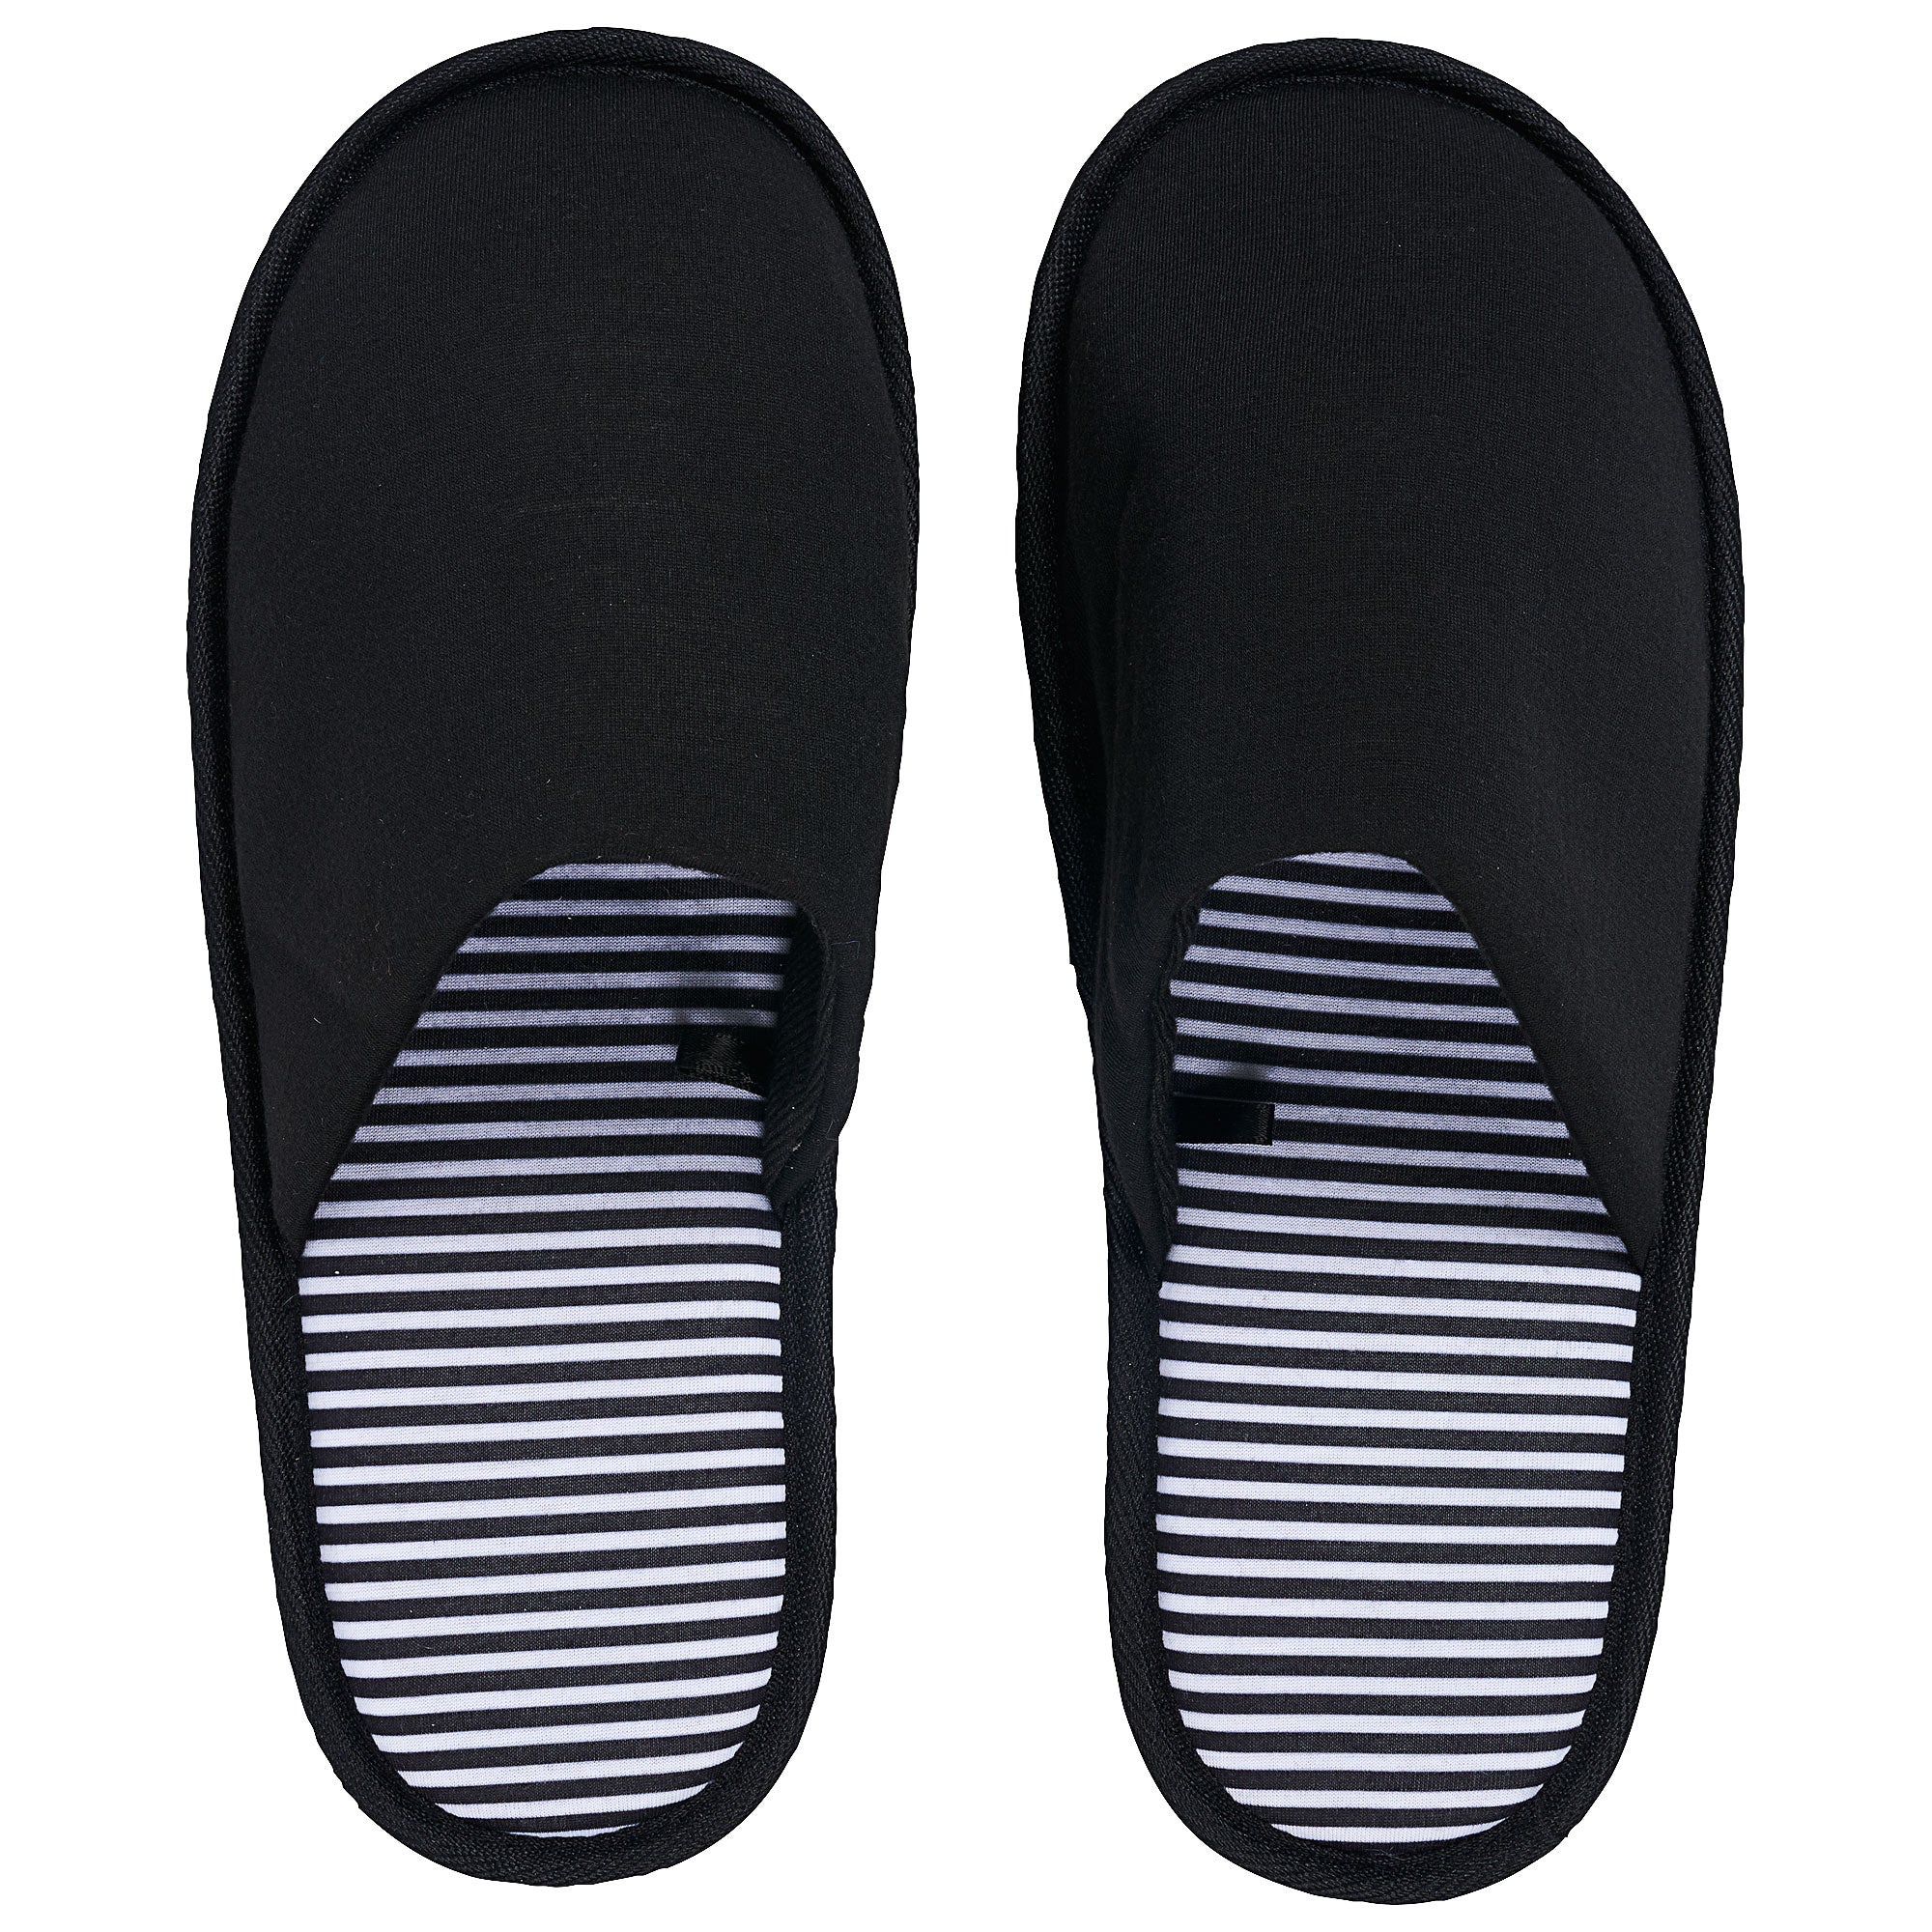 Men's Slippers Striped | The Reject Shop